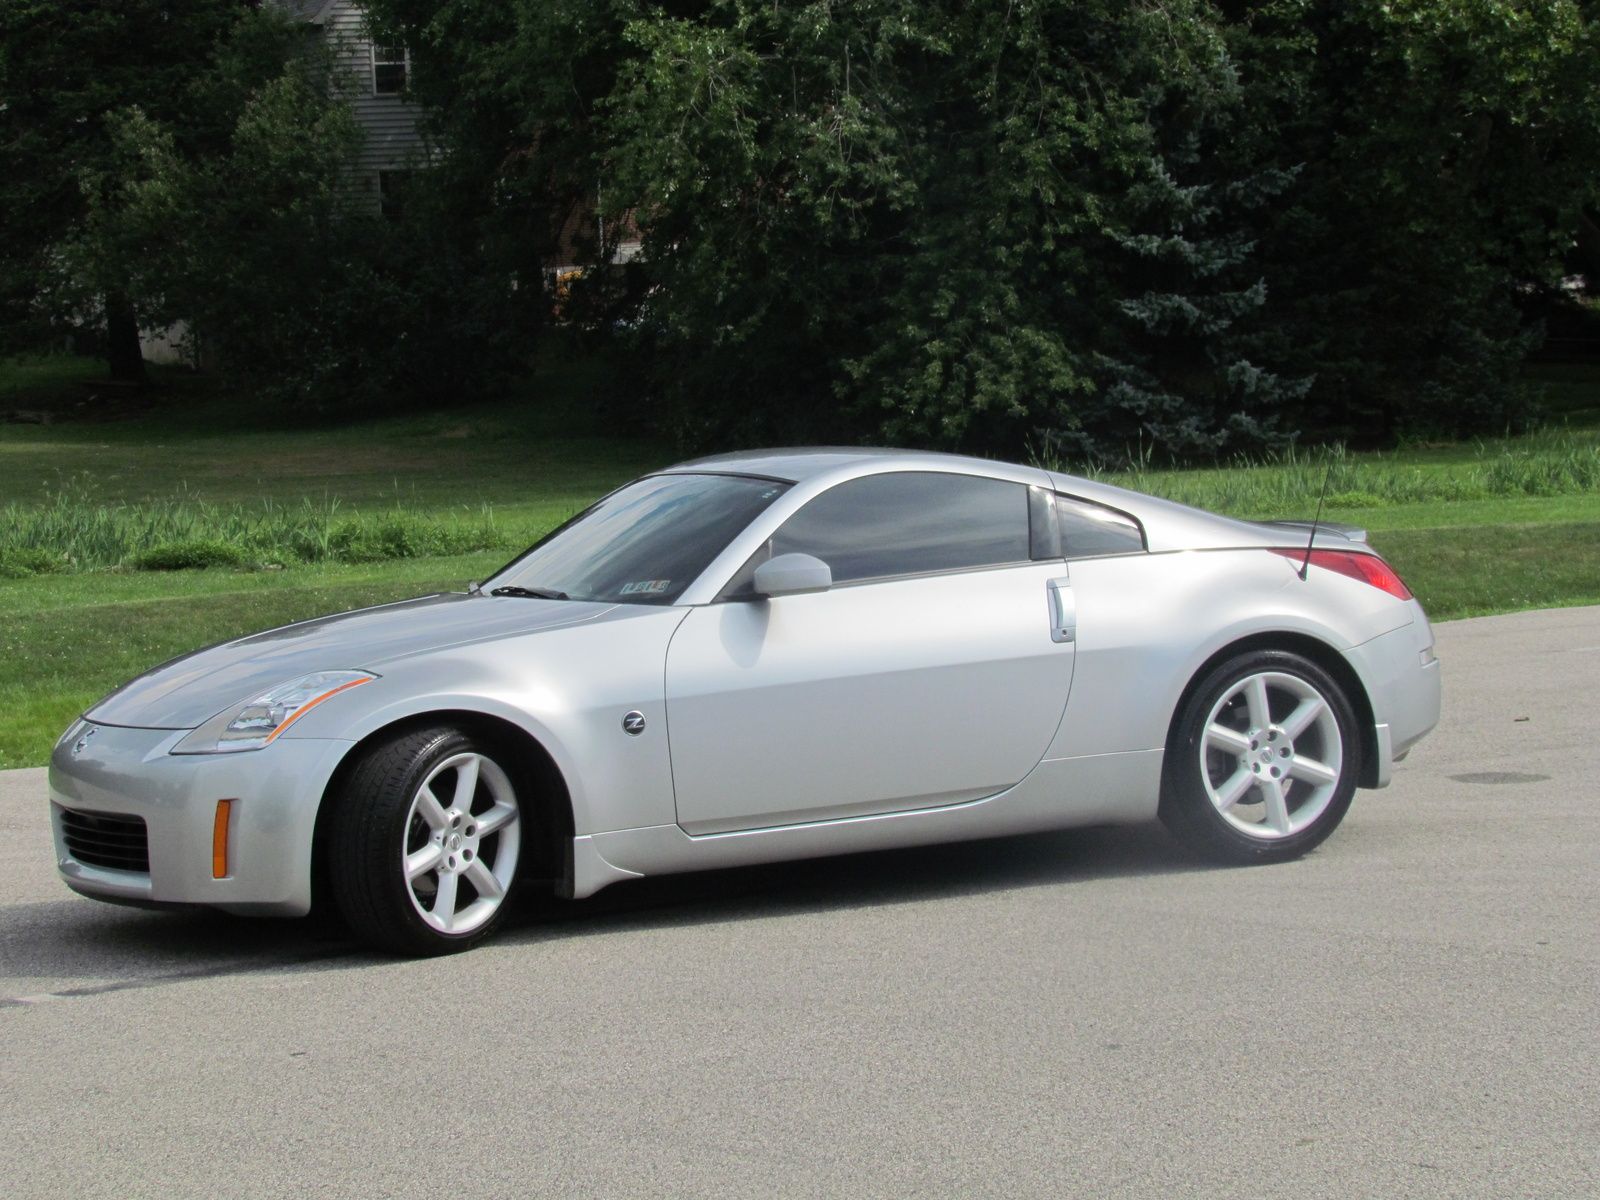 2003 nissan 350z touring specs colors 0 60 0 100 quarter mile drag and top speed review mycarspecs united states usa 2003 nissan 350z touring specs colors